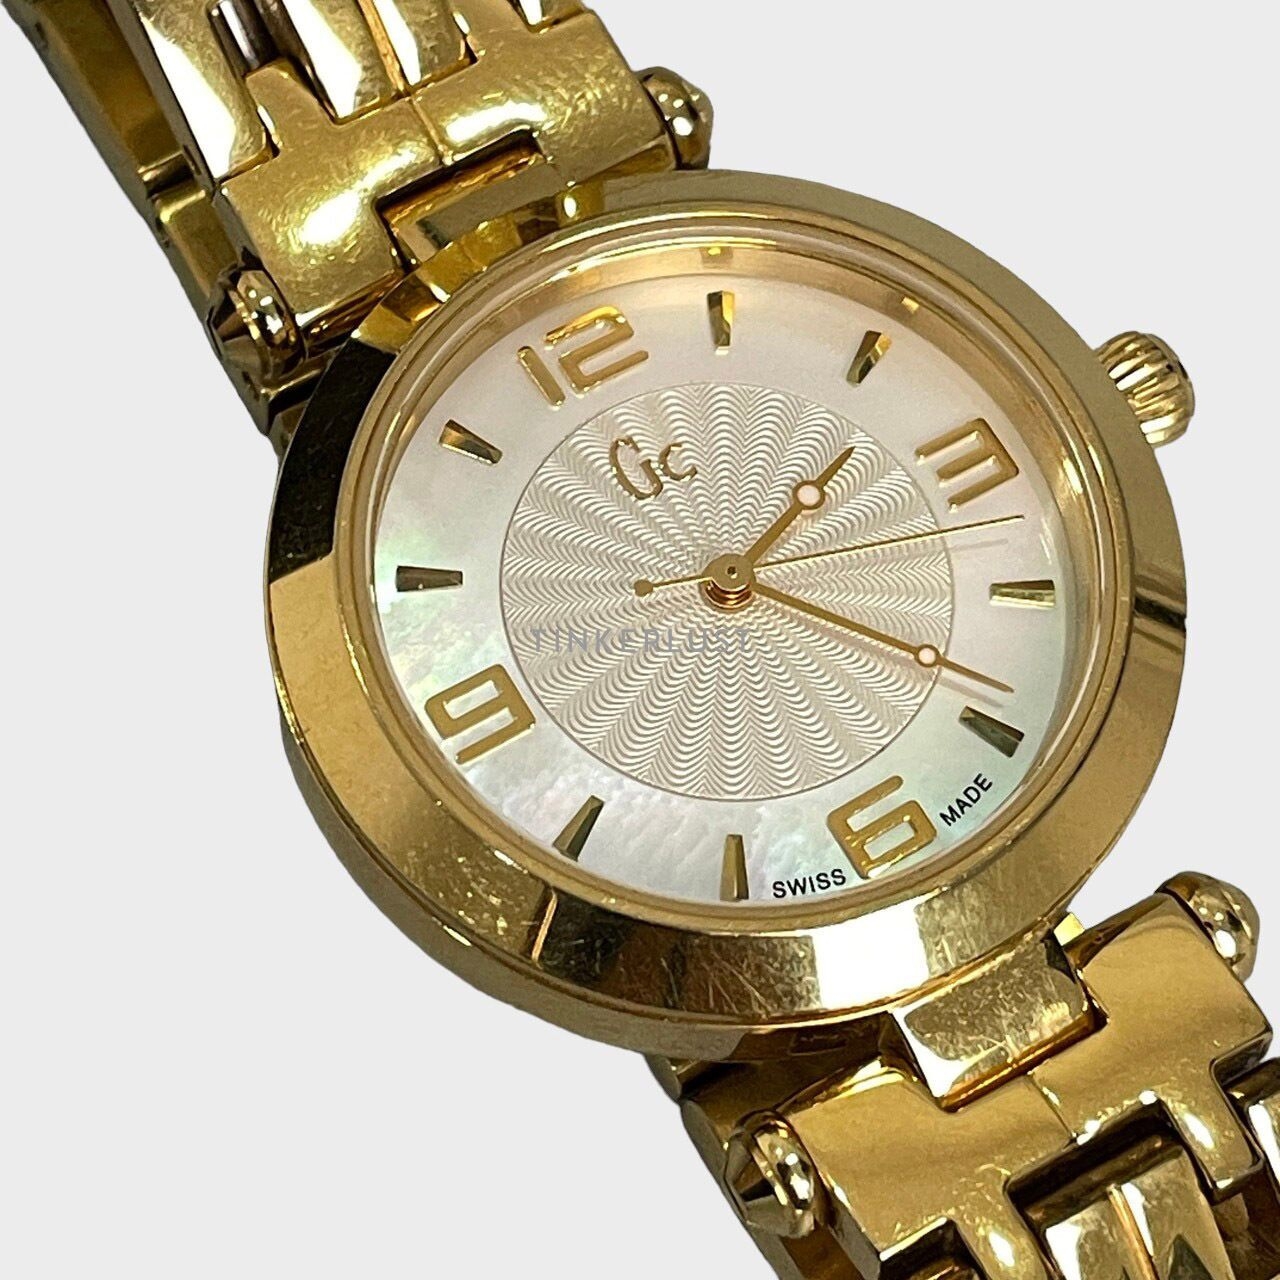 Guess Collection Gold Watch